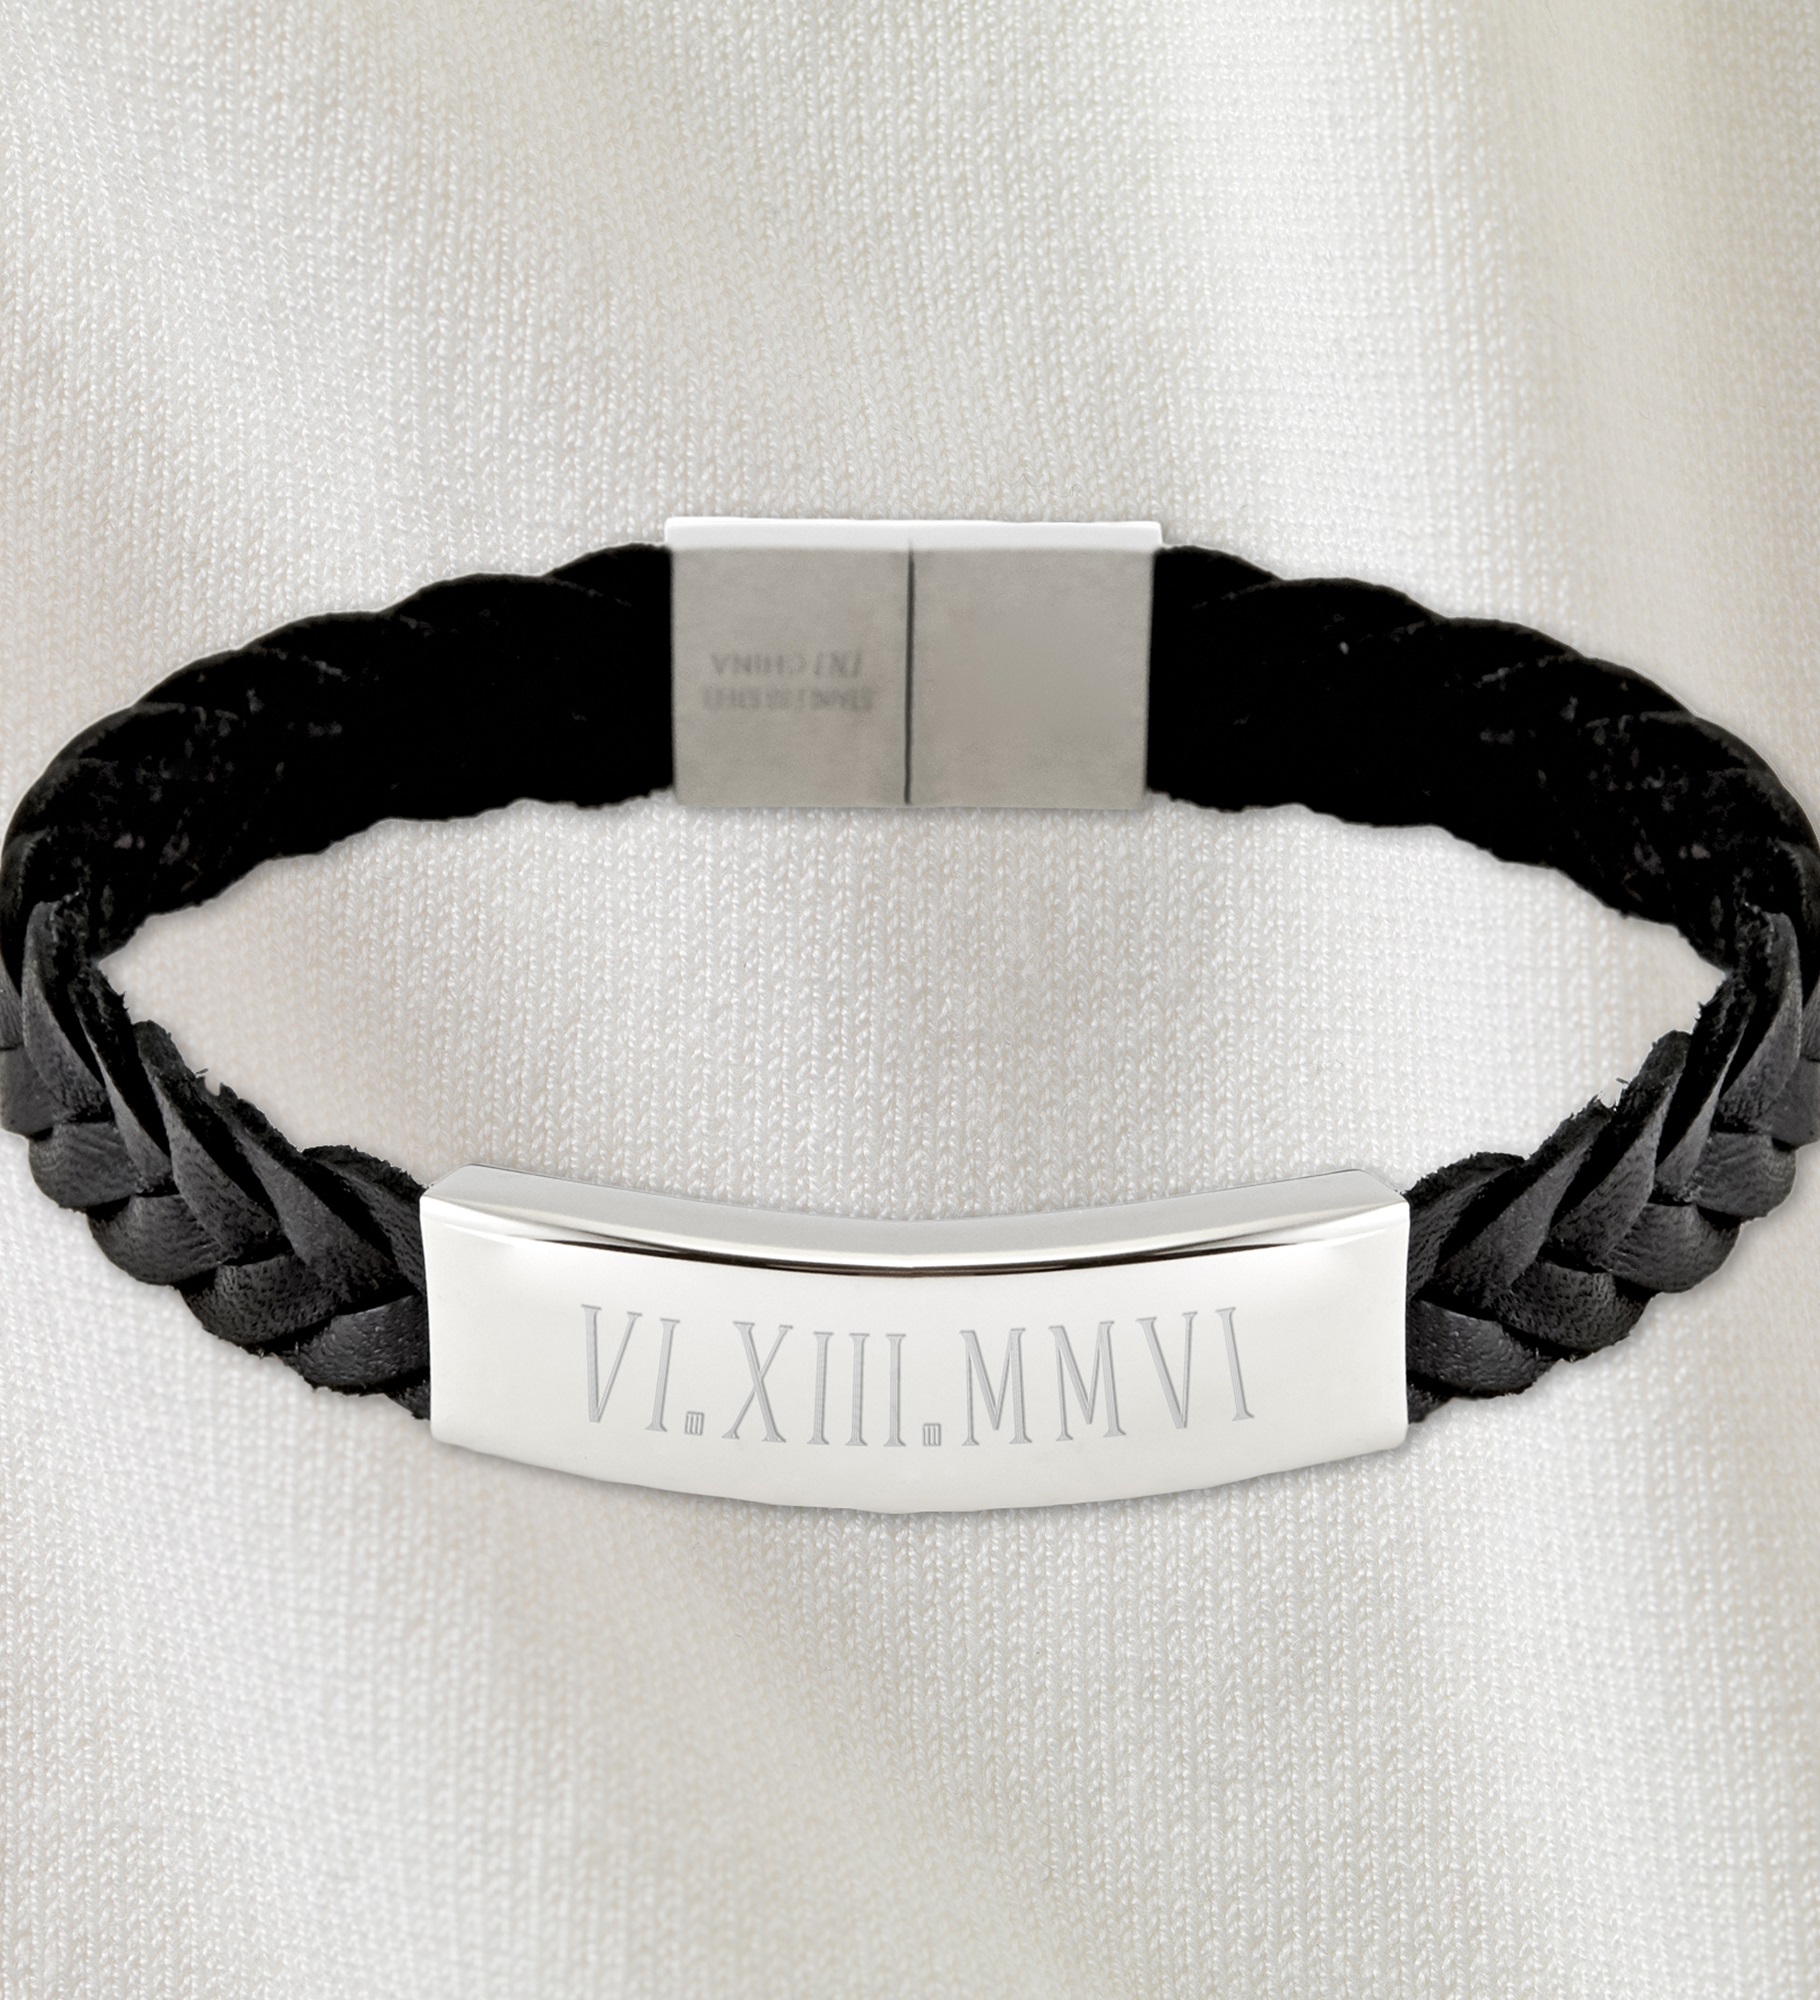 Roman Numeral Personalized Men's Braided Leather Bracelet